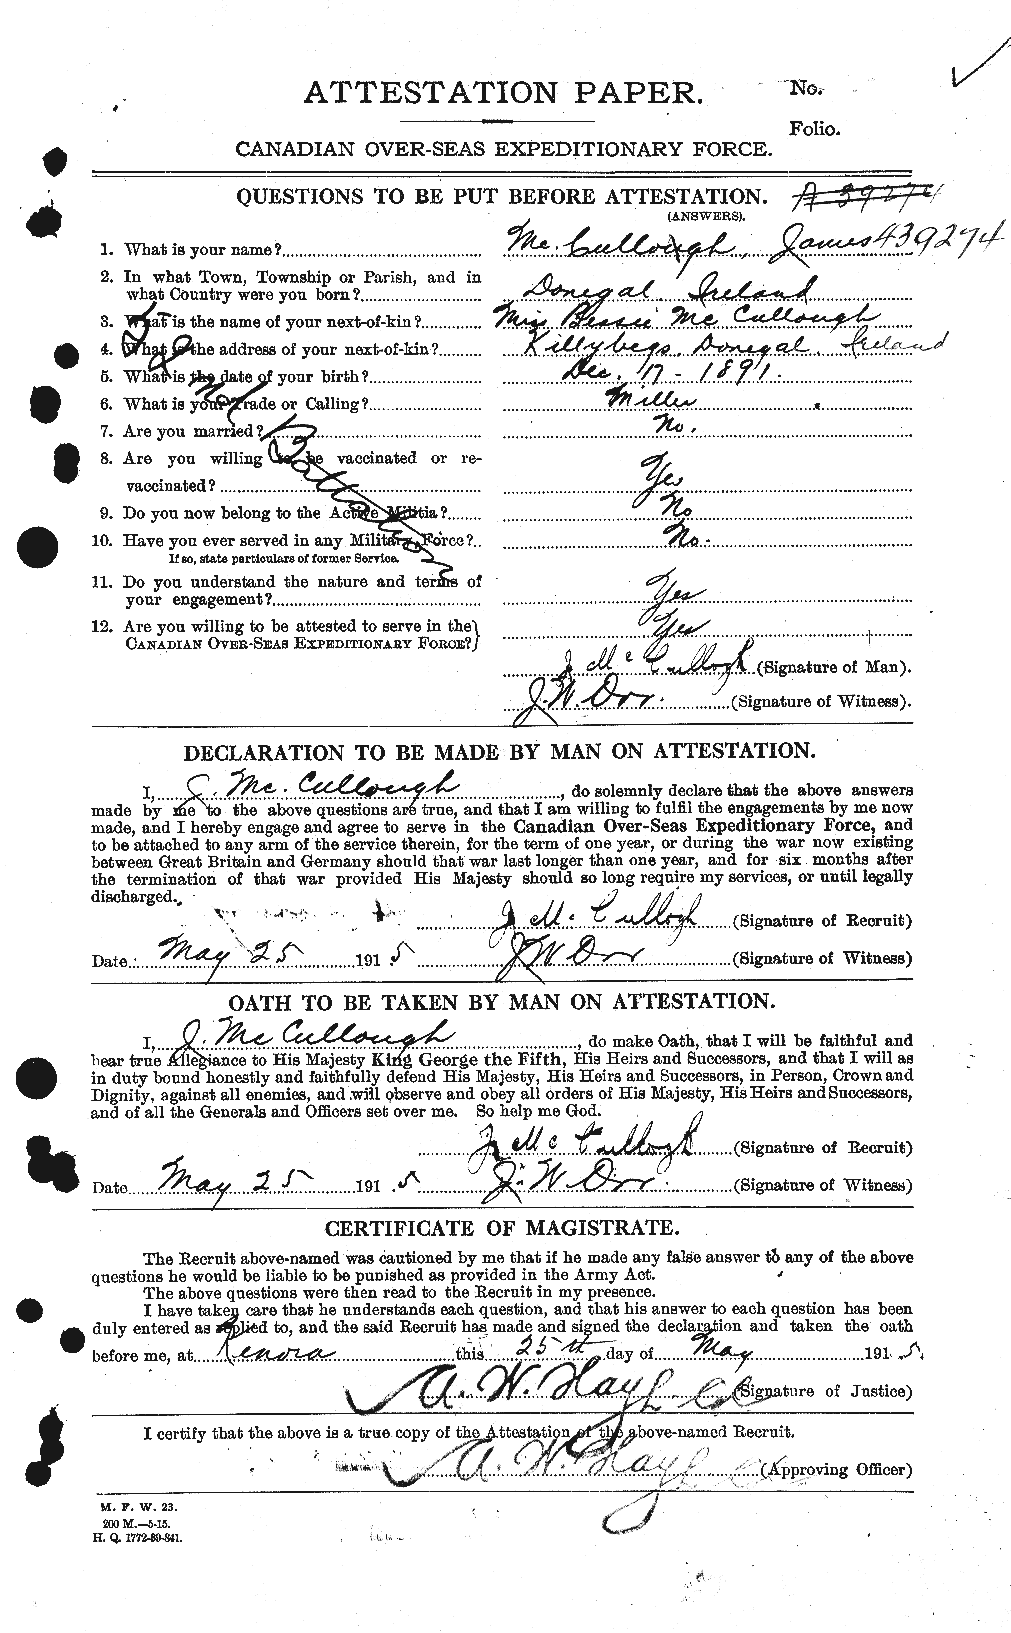 Personnel Records of the First World War - CEF 136999a